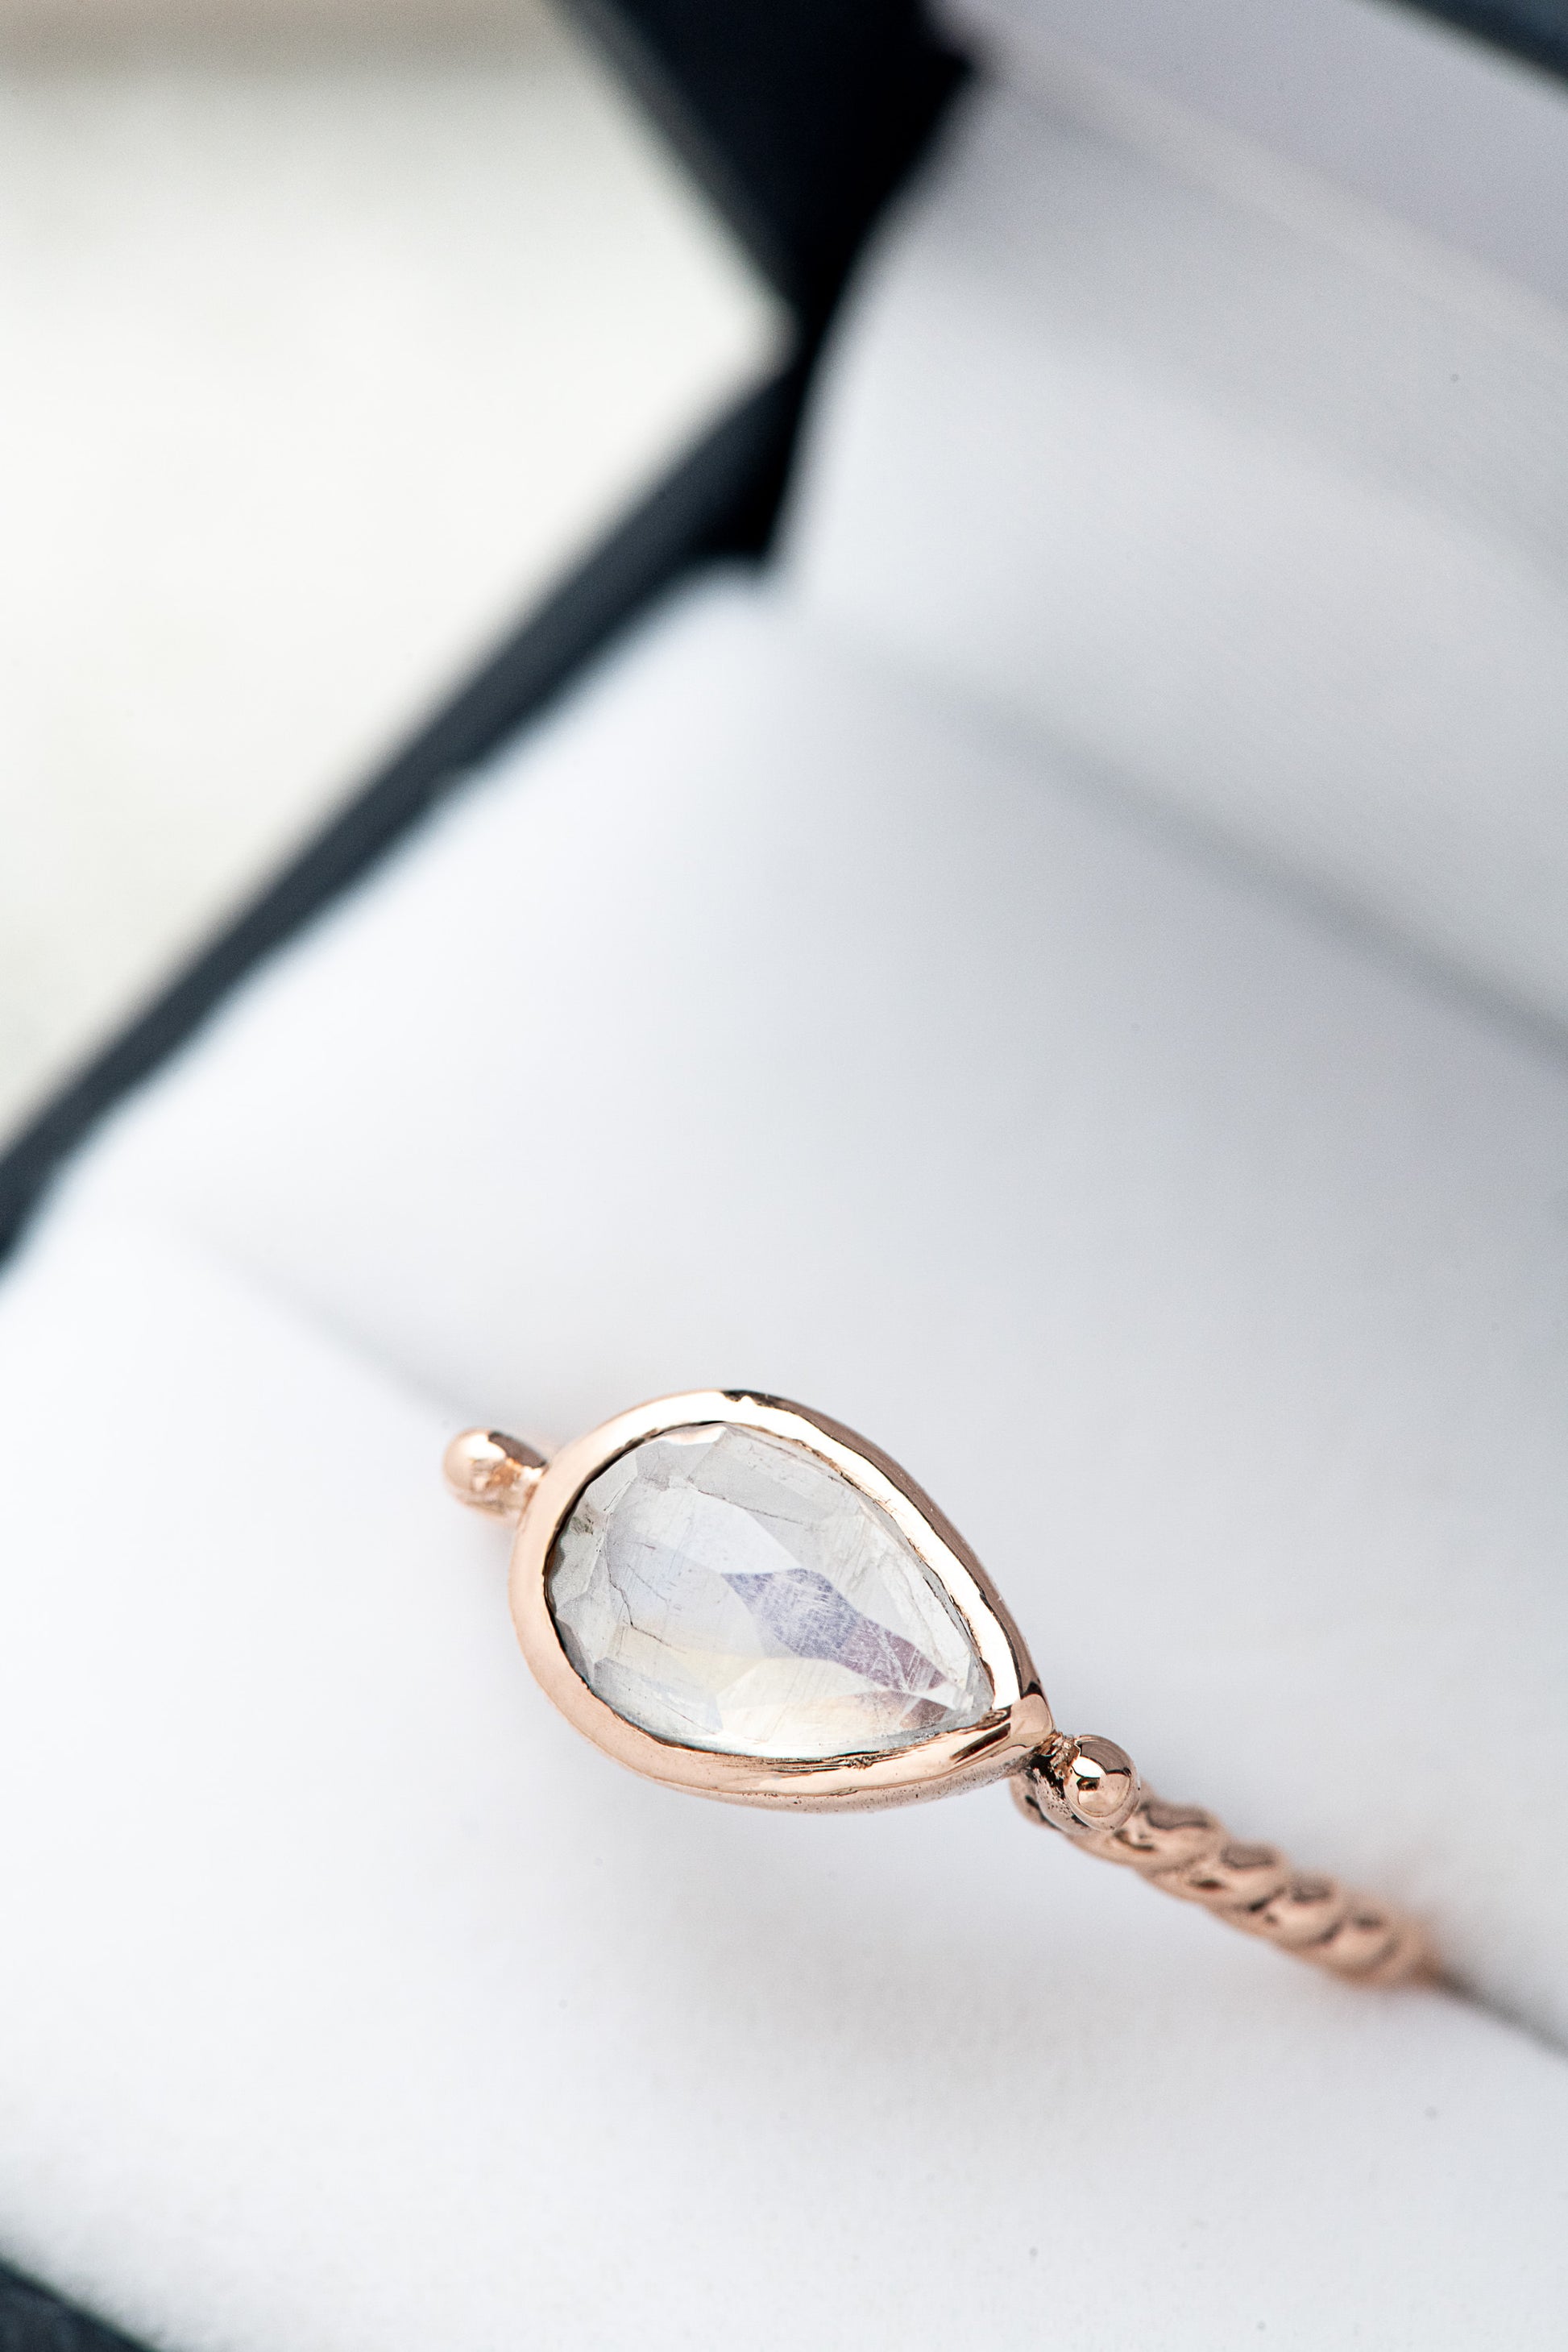 A handmade rose gold Pear Shaped Rainbow Moonstone Ring with a pear shaped stone by Cassin Jewelry.